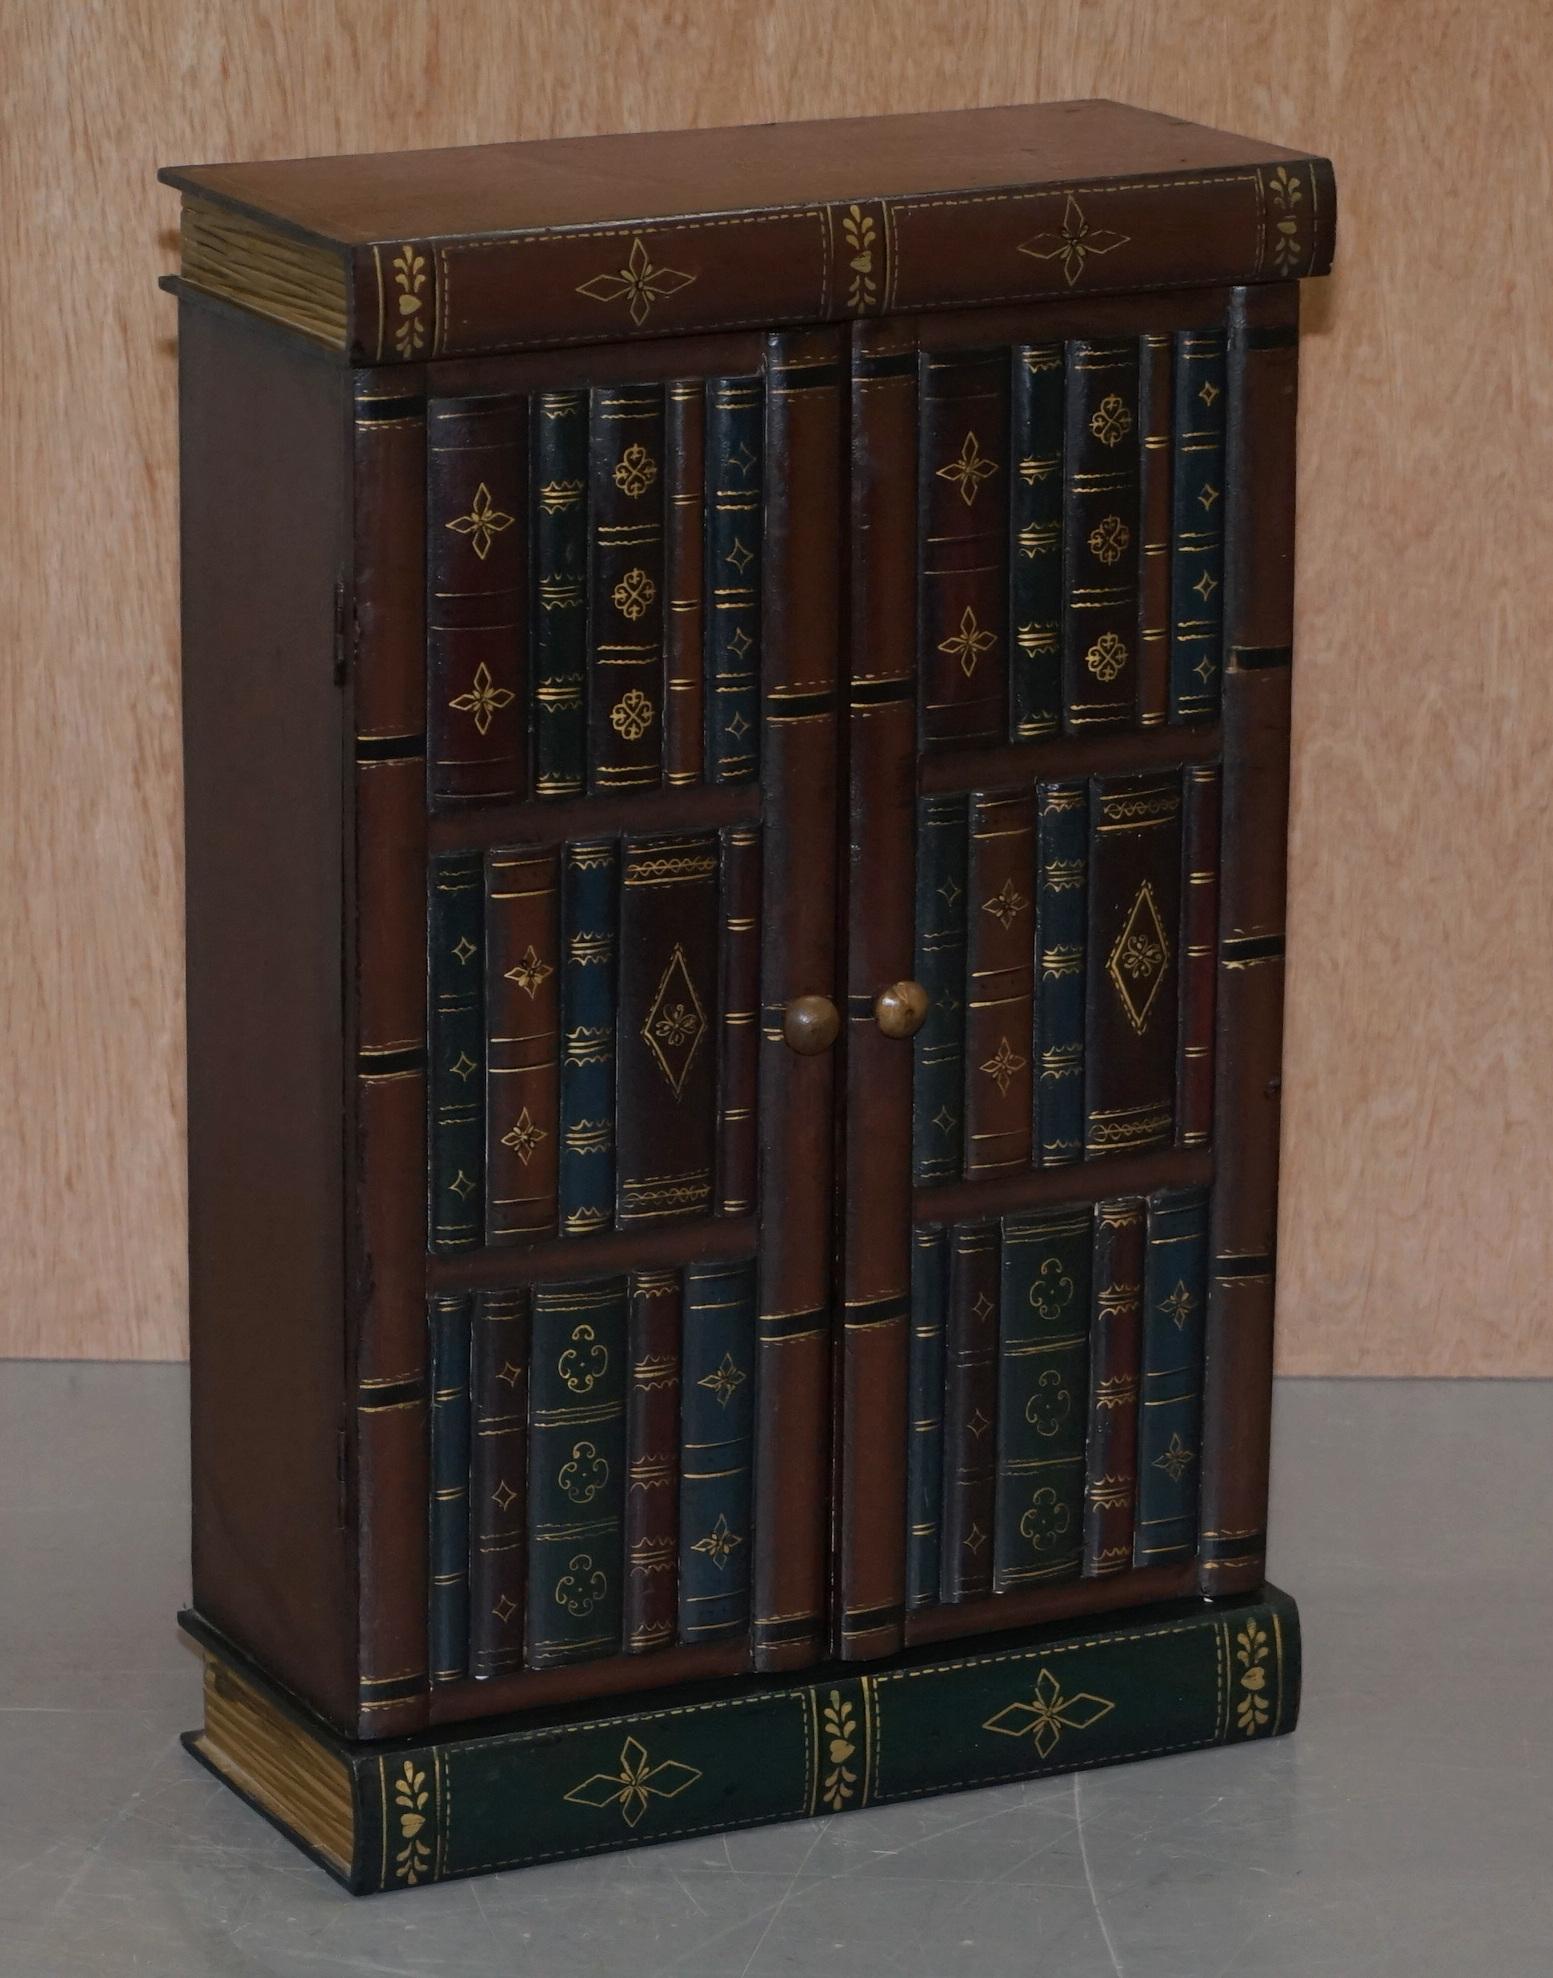 We are delighted to this lovely pair of vintage Faux Book library or study small side tables

A good looking and well-made pair, the faux book style dates back to the early Victorian era and was a great way to hide precious trinkets

We have